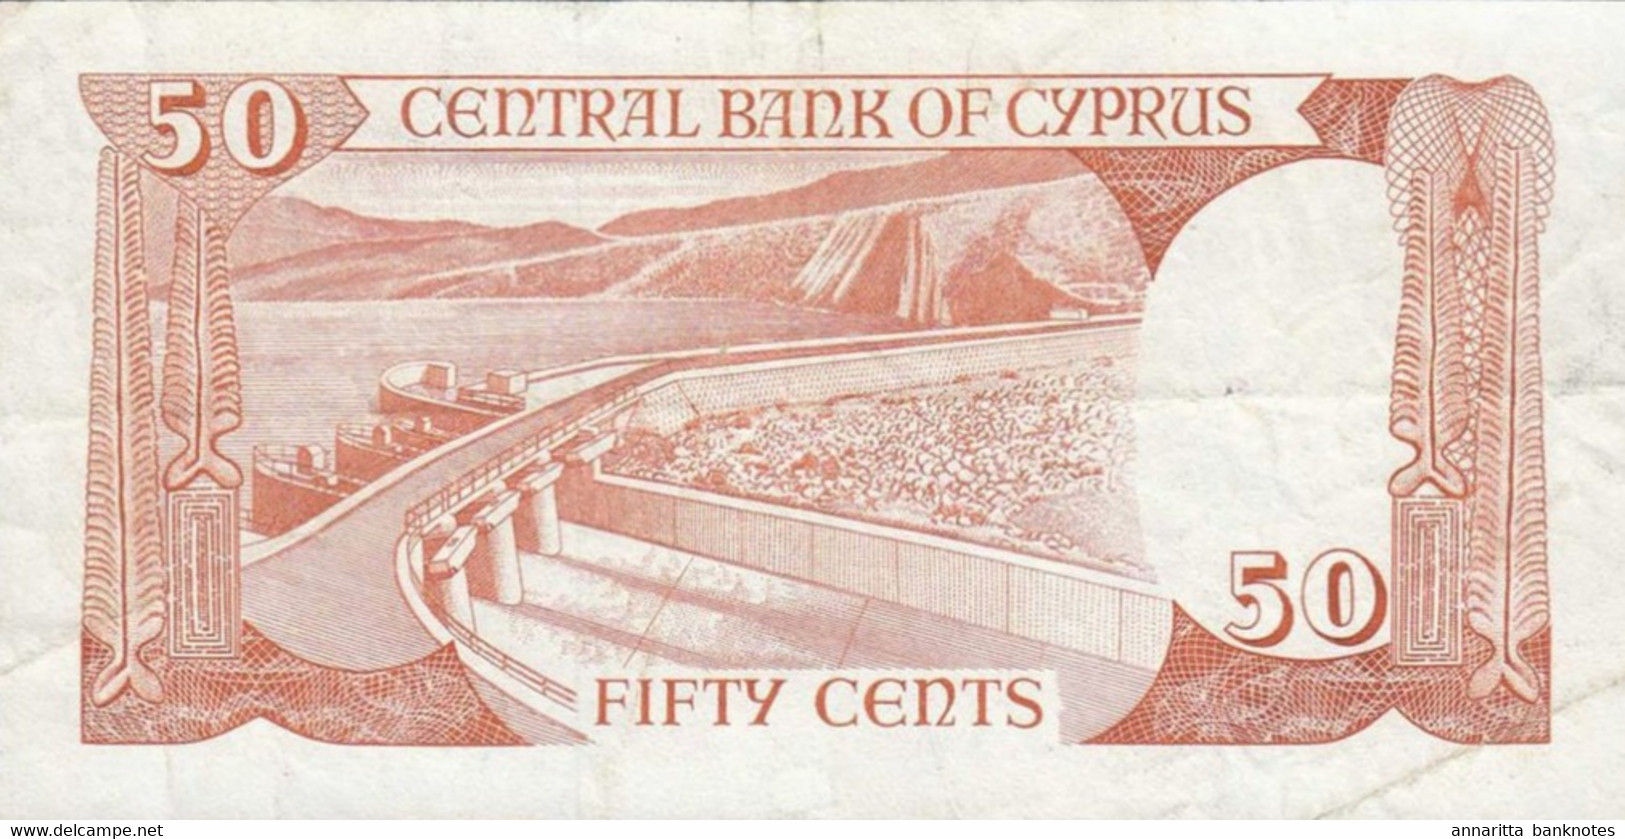 Cyprus 50 Cents 1989, S/N P324890 VF, P-52a, CY B311c - Chipre